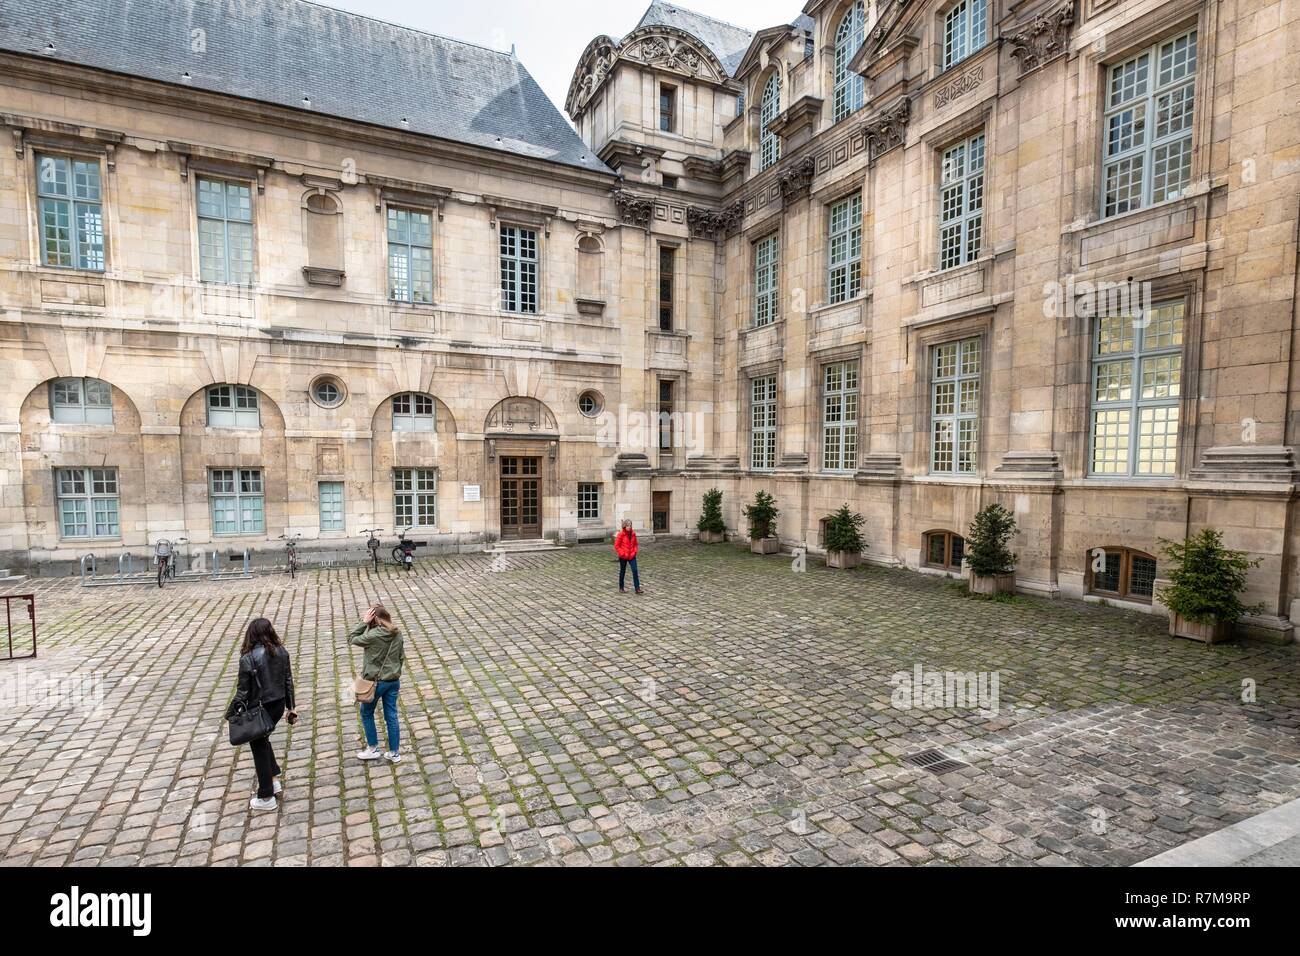 France, Paris, Bibliotheque Historique de la Ville de Paris or BHVP, public library specializing in the history of the city of Paris, founded in 1871 and located since 1969 in the Lamoignon Hotel (16th century) Stock Photo